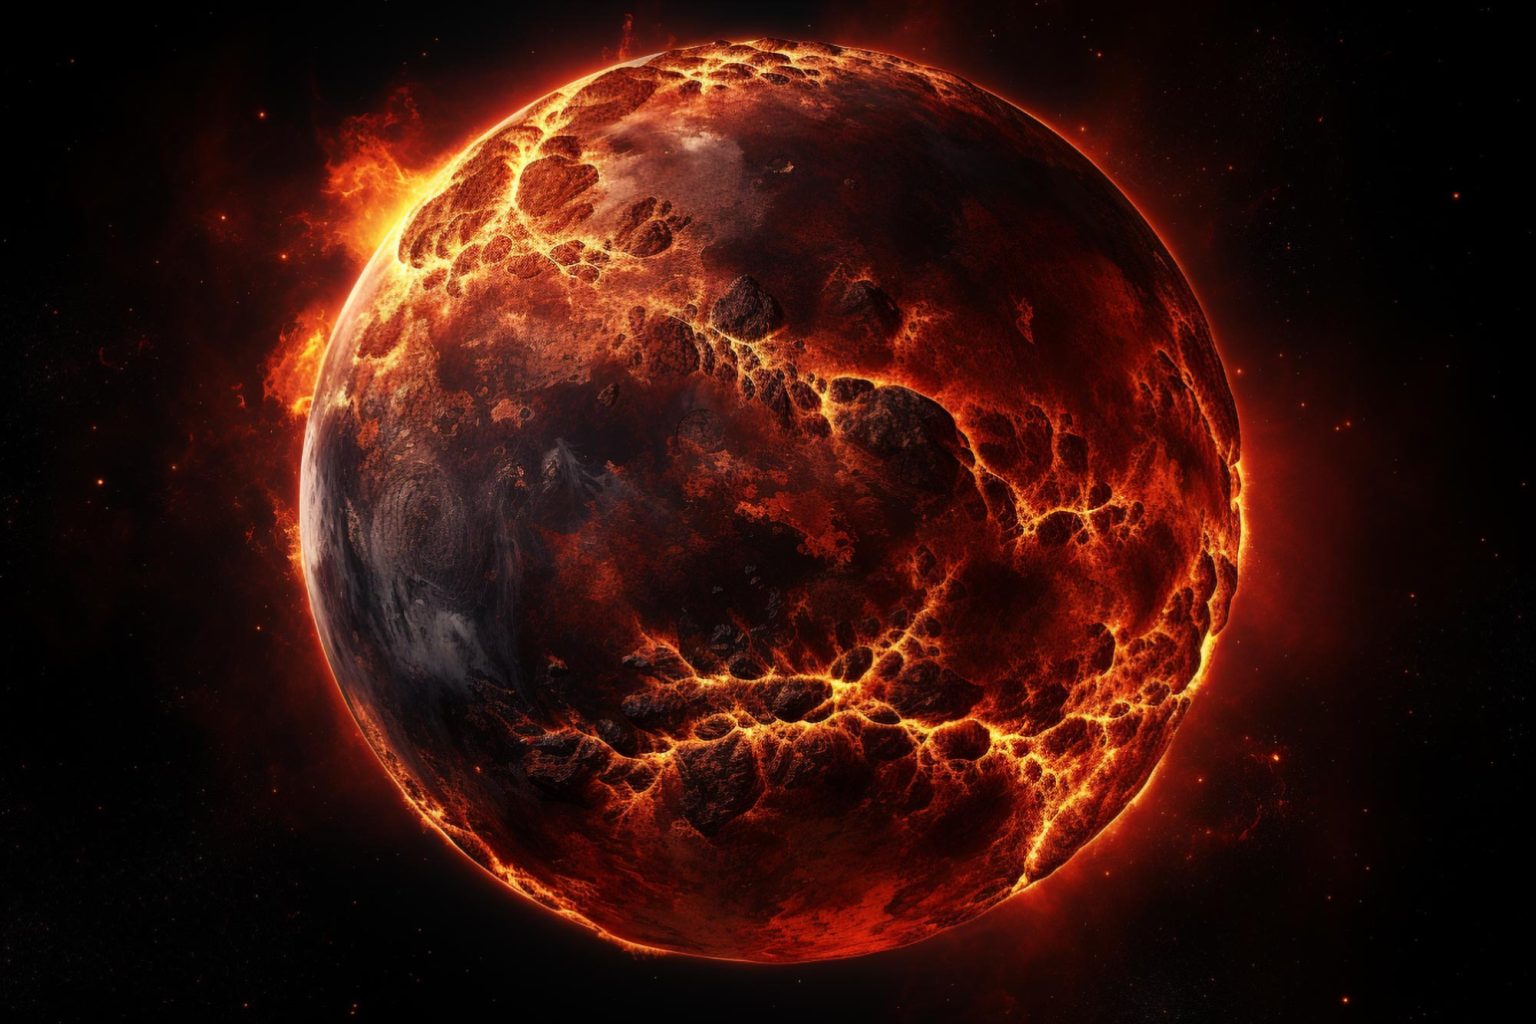 An image of a fiery planet in space, representing Earth changed.